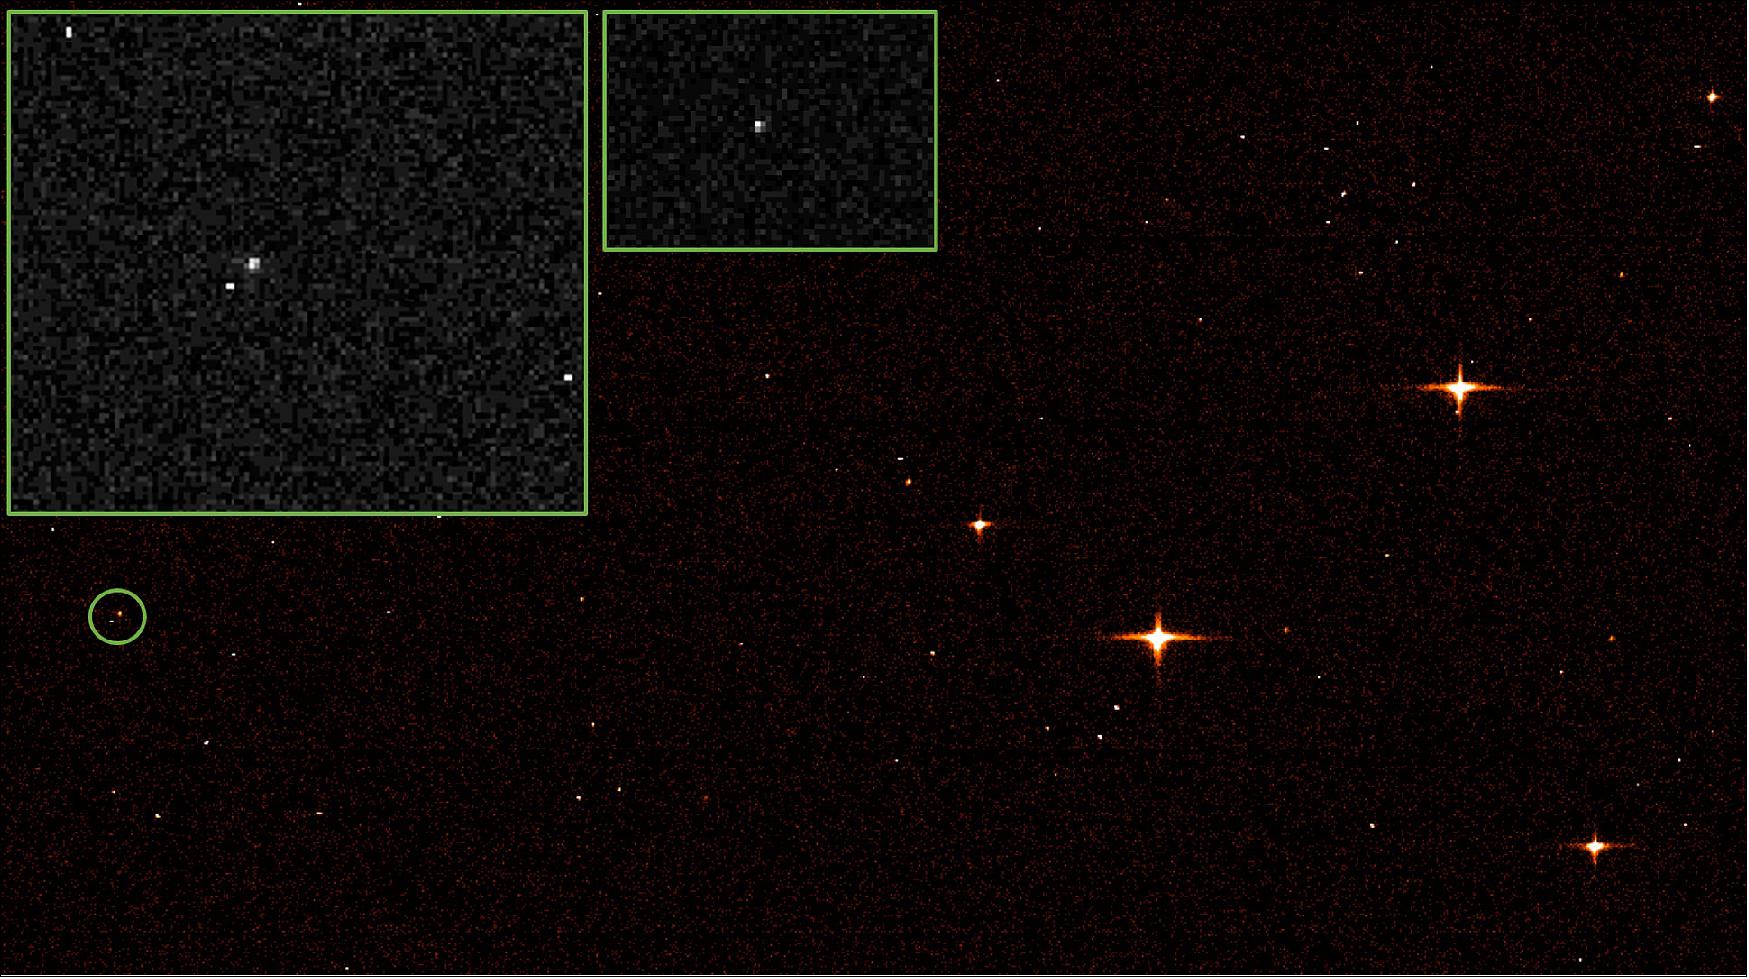 Figure 34: Images of the James Webb Space Telescope taken by ESA’s Gaia observatory on 18 February 2022. — Background frame: Cutout of the specially recorded image from Gaia’s sky mapper instrument at the first of the two observations from Gaia’s two telescopes. The reddish colour is artificial, chosen just for illustrative reasons. The frame shows a few relatively bright stars, several faint stars, a few disturbances – and a spacecraft. It is marked by the green circle. — Left grey inset: Zoom into the frame showing the Webb image at full resolution. It is the slightly extended speck of light in the centre. The other three bright dots are traces of energetic cosmic-ray particles which hit the CCD chip during the 2.5 seconds of exposure. The on-board software is capable of autonomously and reliably distinguishing these from star images. — Right grey inset: The second “photo” of Webb, taken in the second field of view of Gaia’s telescopes about 106.5 minutes after the first one. Each of the two images were created by just under 1000 sunlight photons arriving from the Webb spacecraft (image credit: ESA/Gaia/DPAC; CC BY-SA 3.0 IGO)